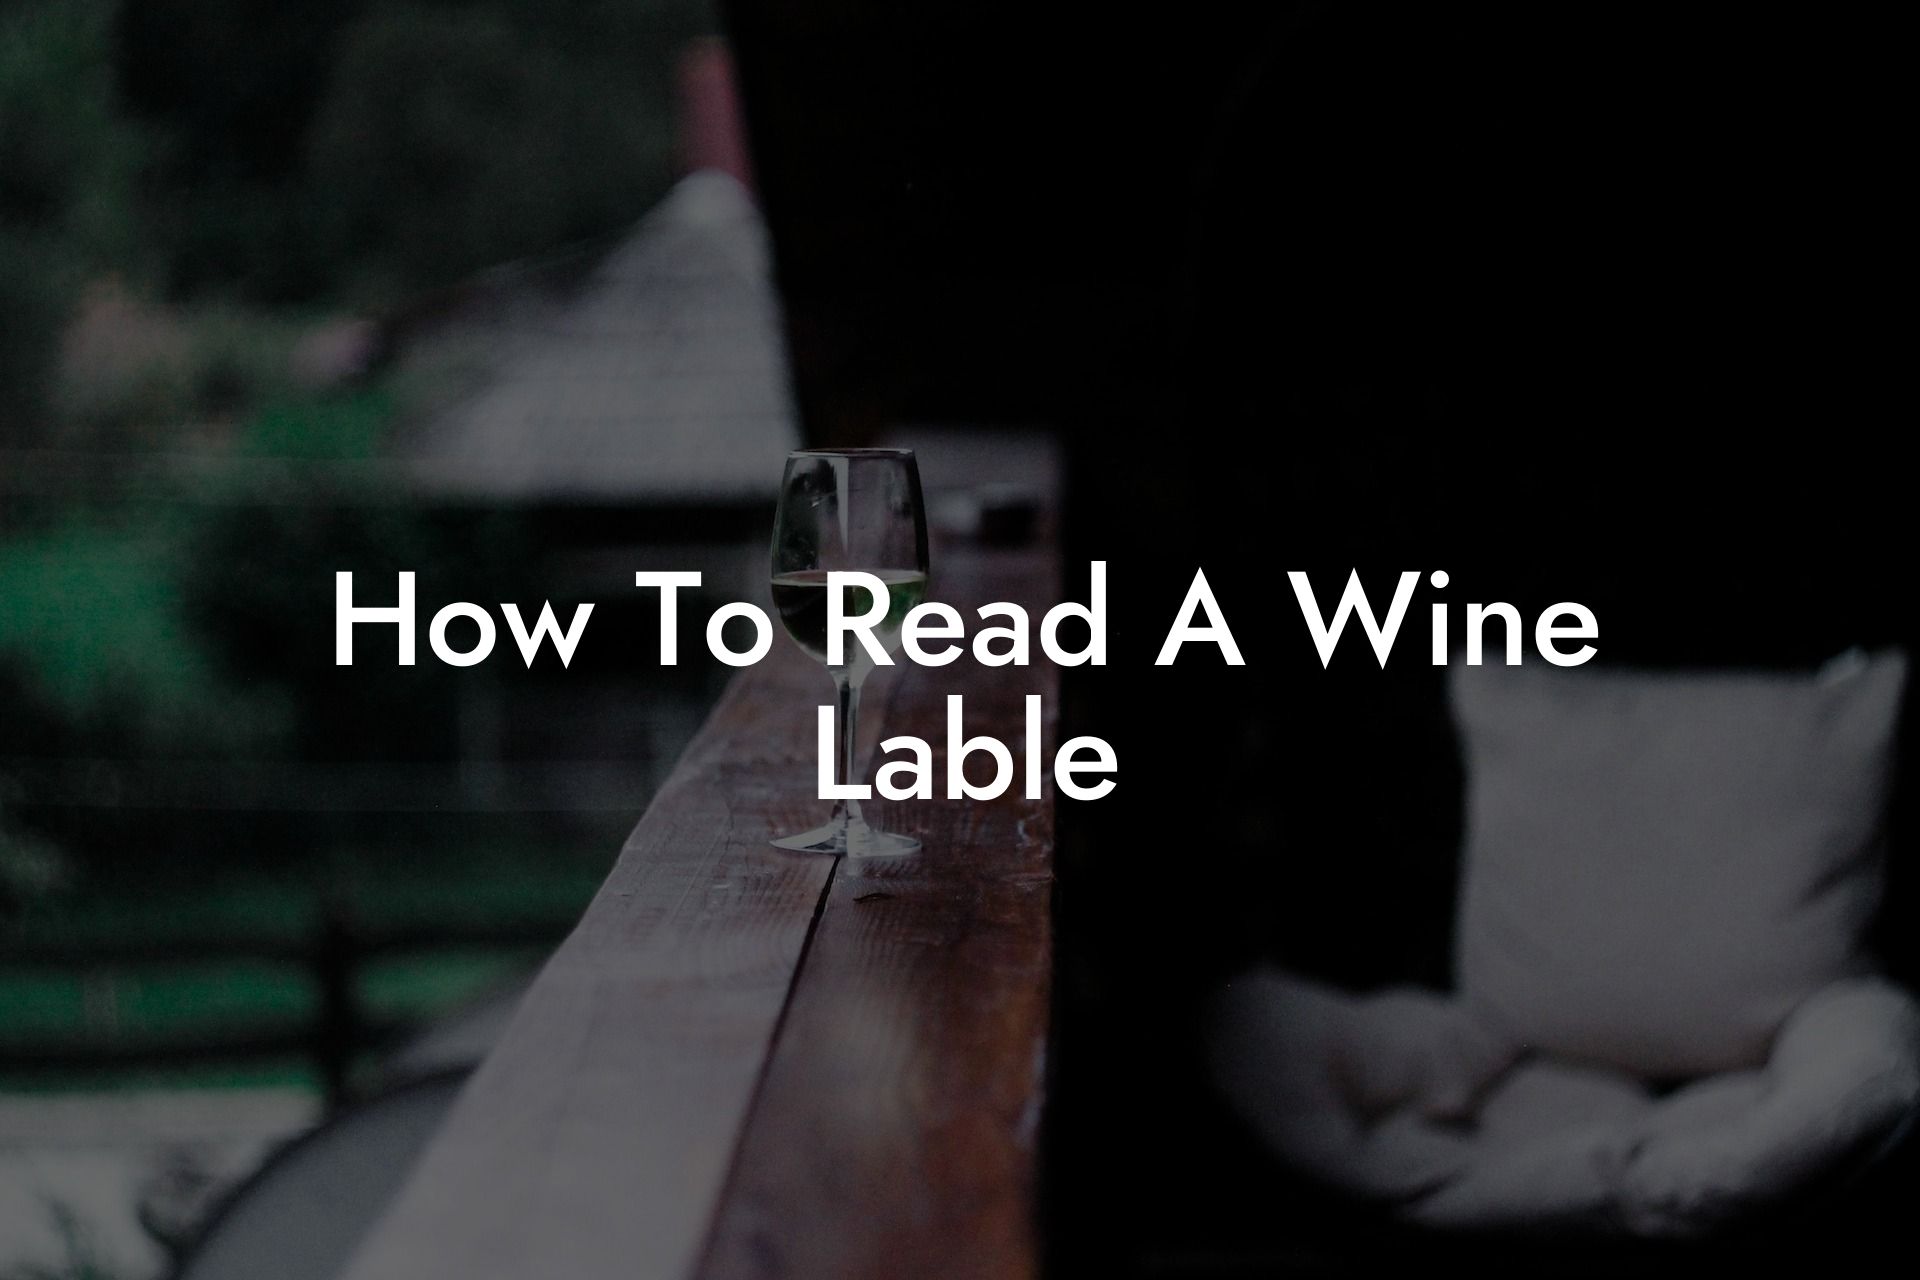 How To Read A Wine Lable